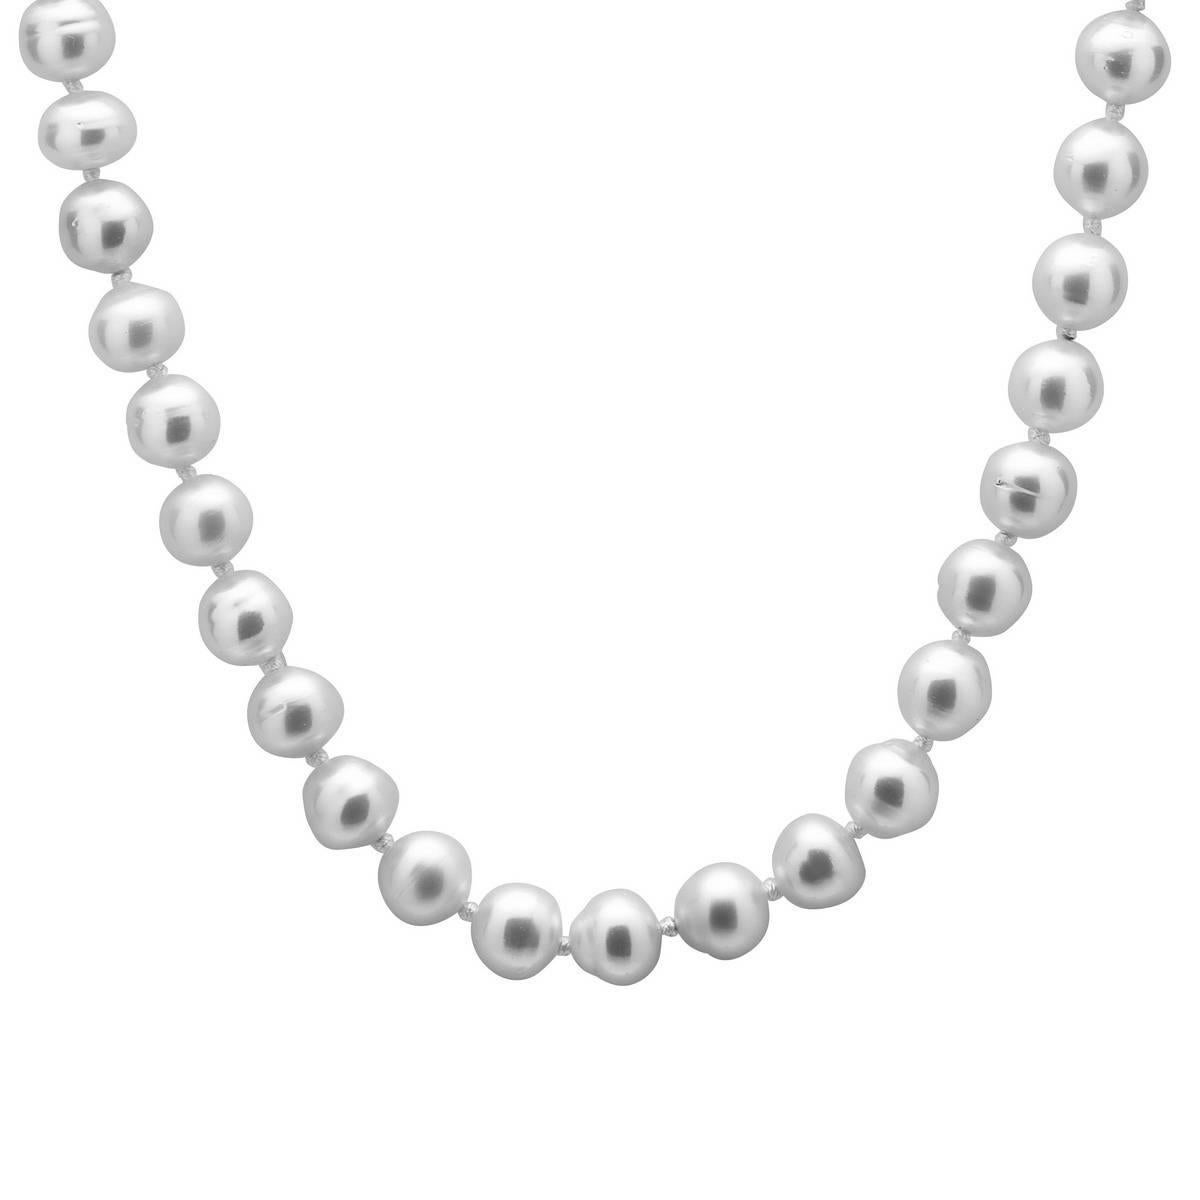 Wrap around this long gorgeous South Sea Pearl Necklace. The pearls are 12mm in size.

South Sea Pearls:876.9cts

